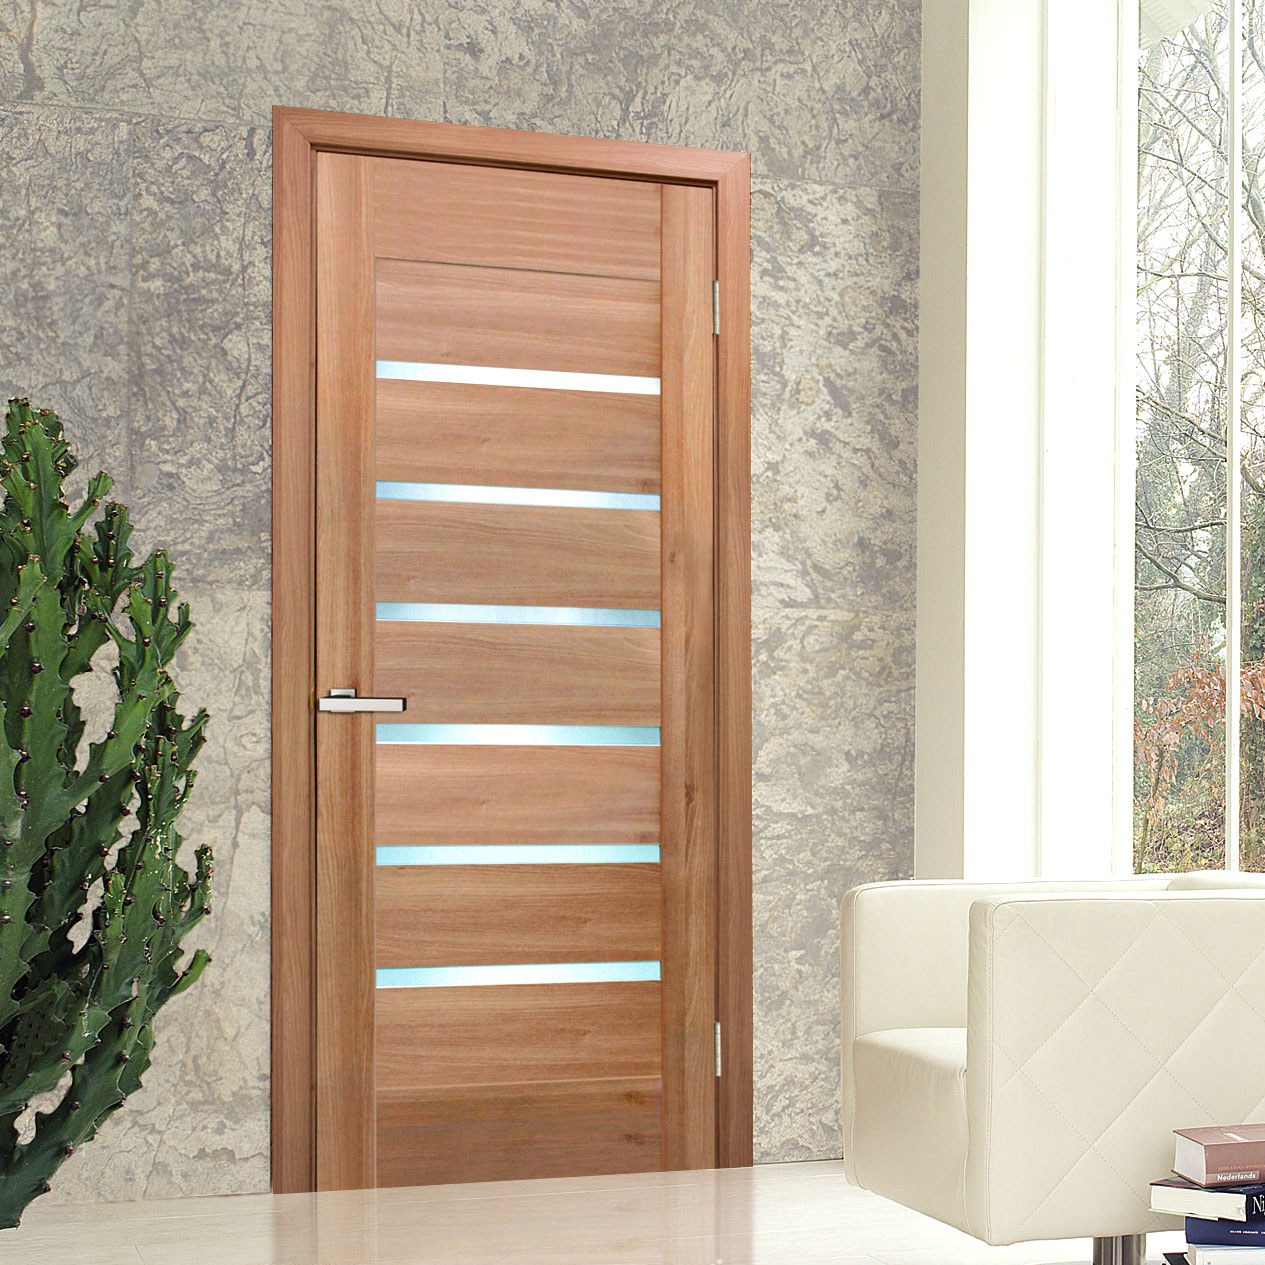 Choosing the perfect door material: wood, steel, glass – a comprehensive guide